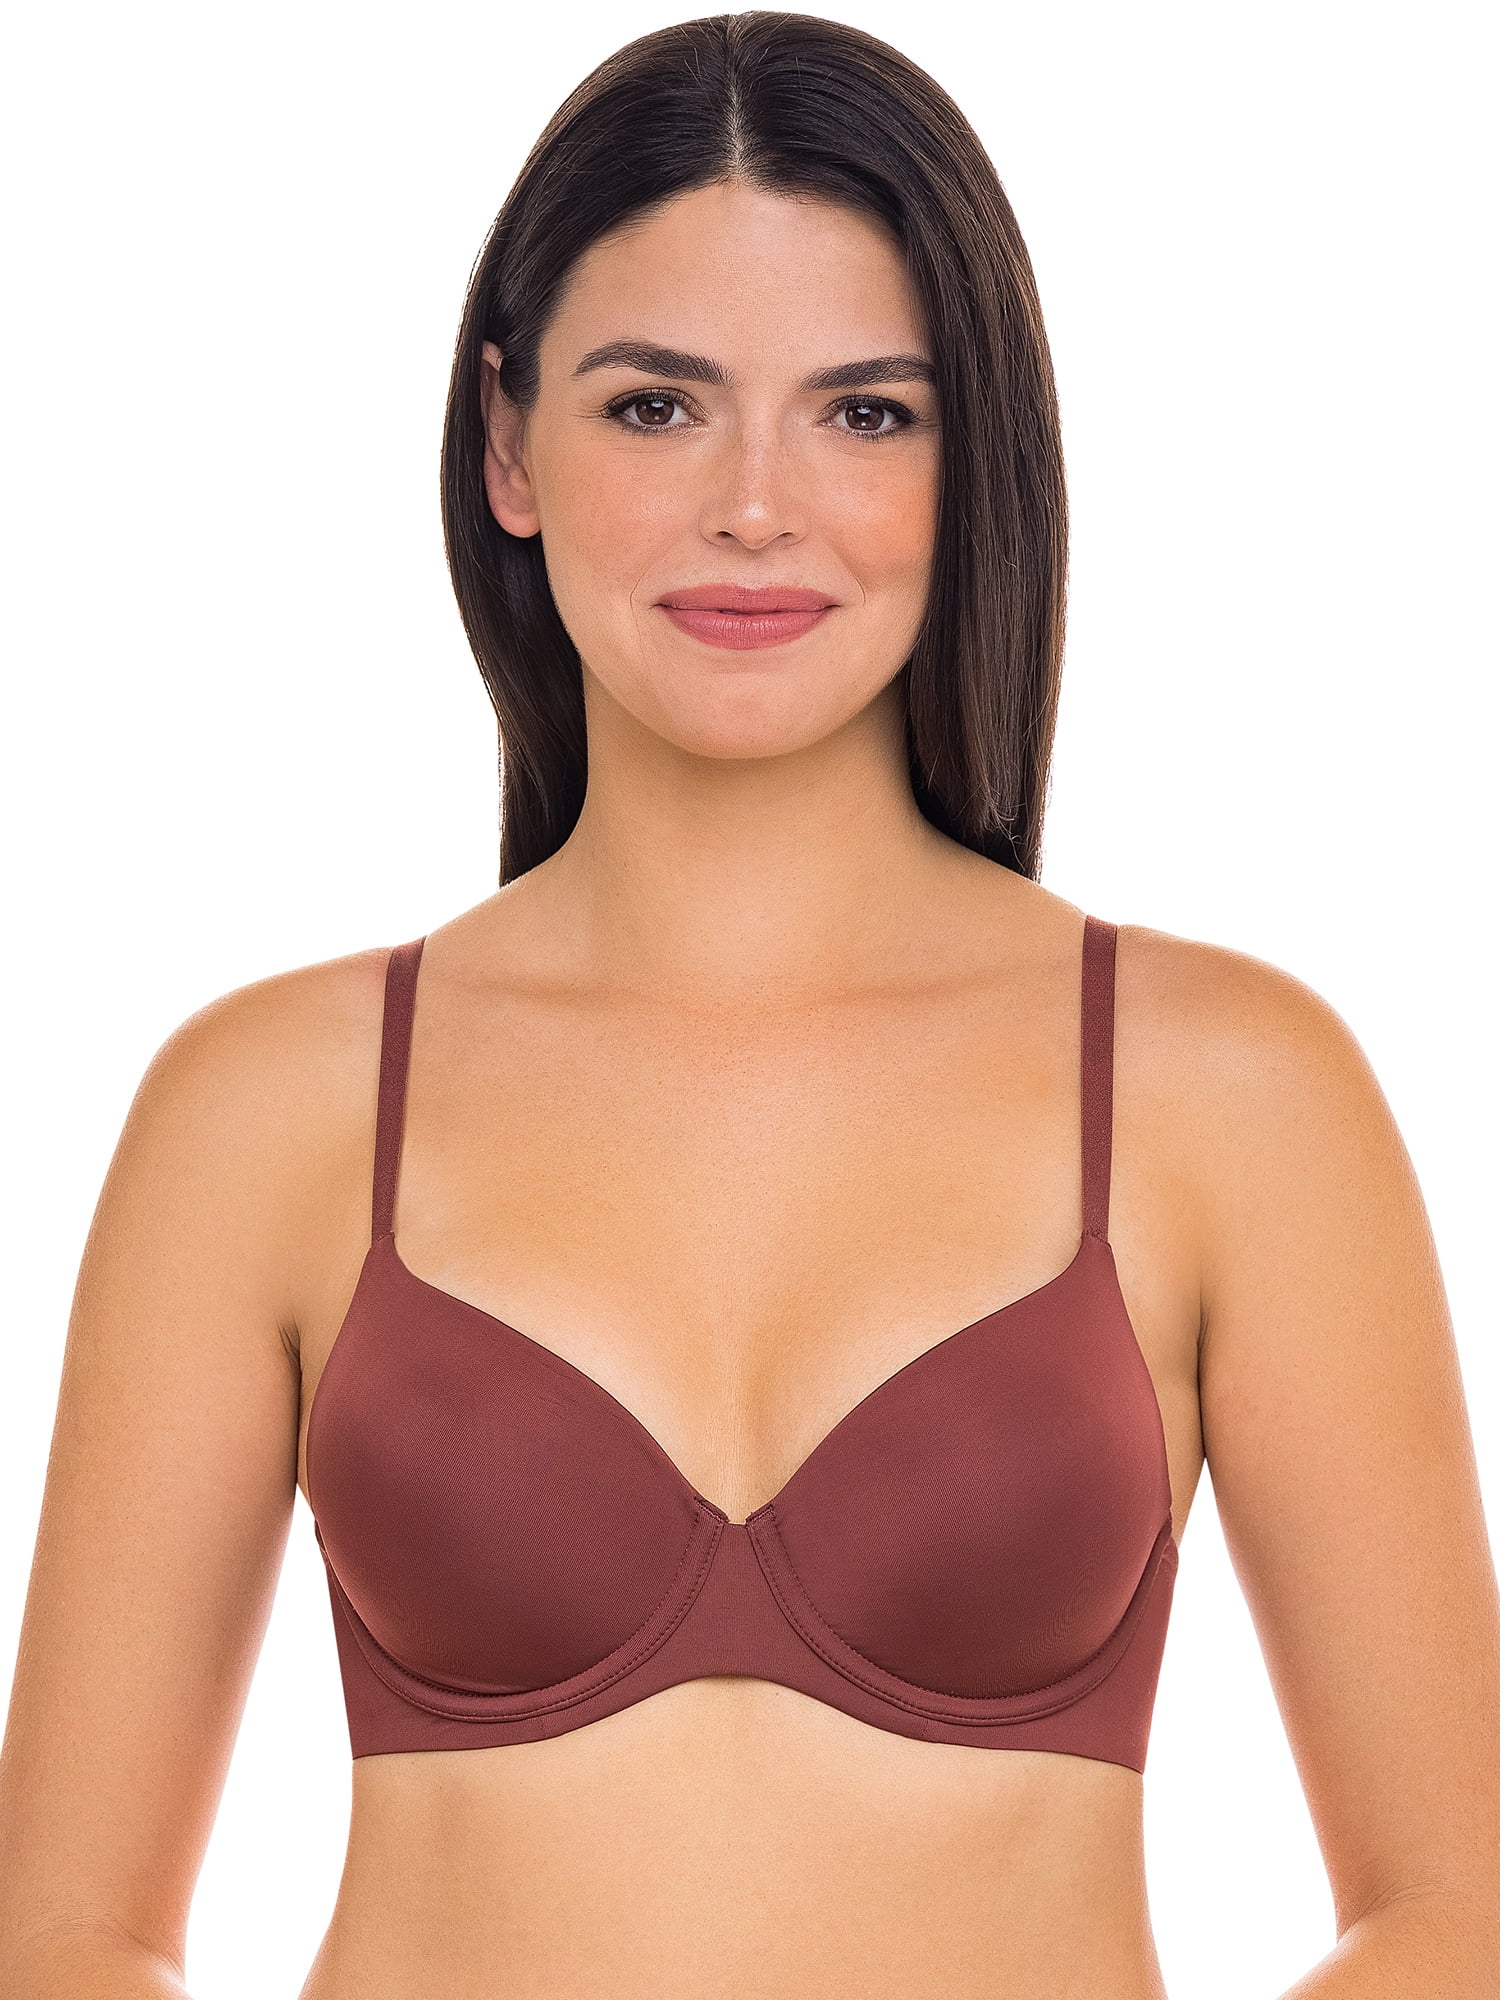 ToBeInStyle Women's Pack of 6 Mystery Bras - Basics - Size 34A